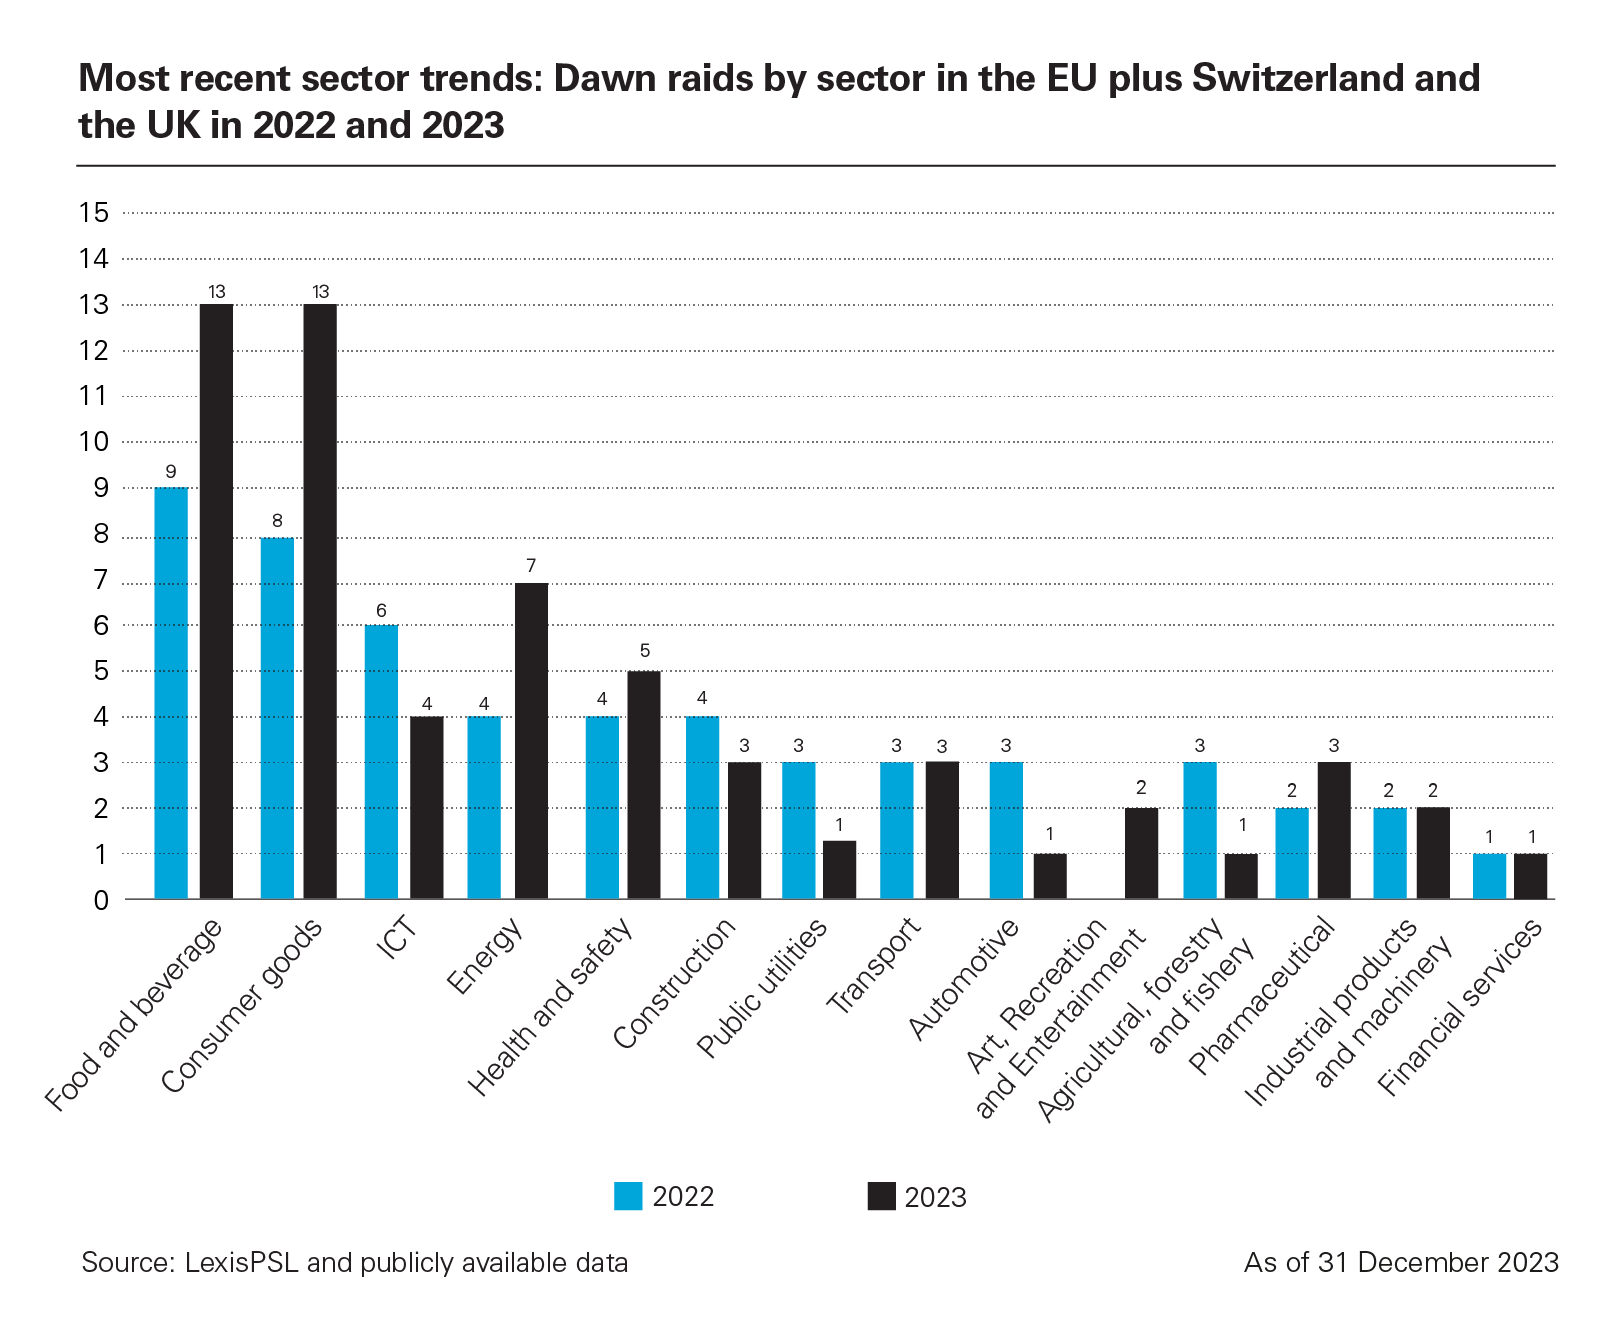 Most recent sector trends: Dawn raids by sector in the EU plus Switzerland and the UK in 2022 and 2023 – Q4